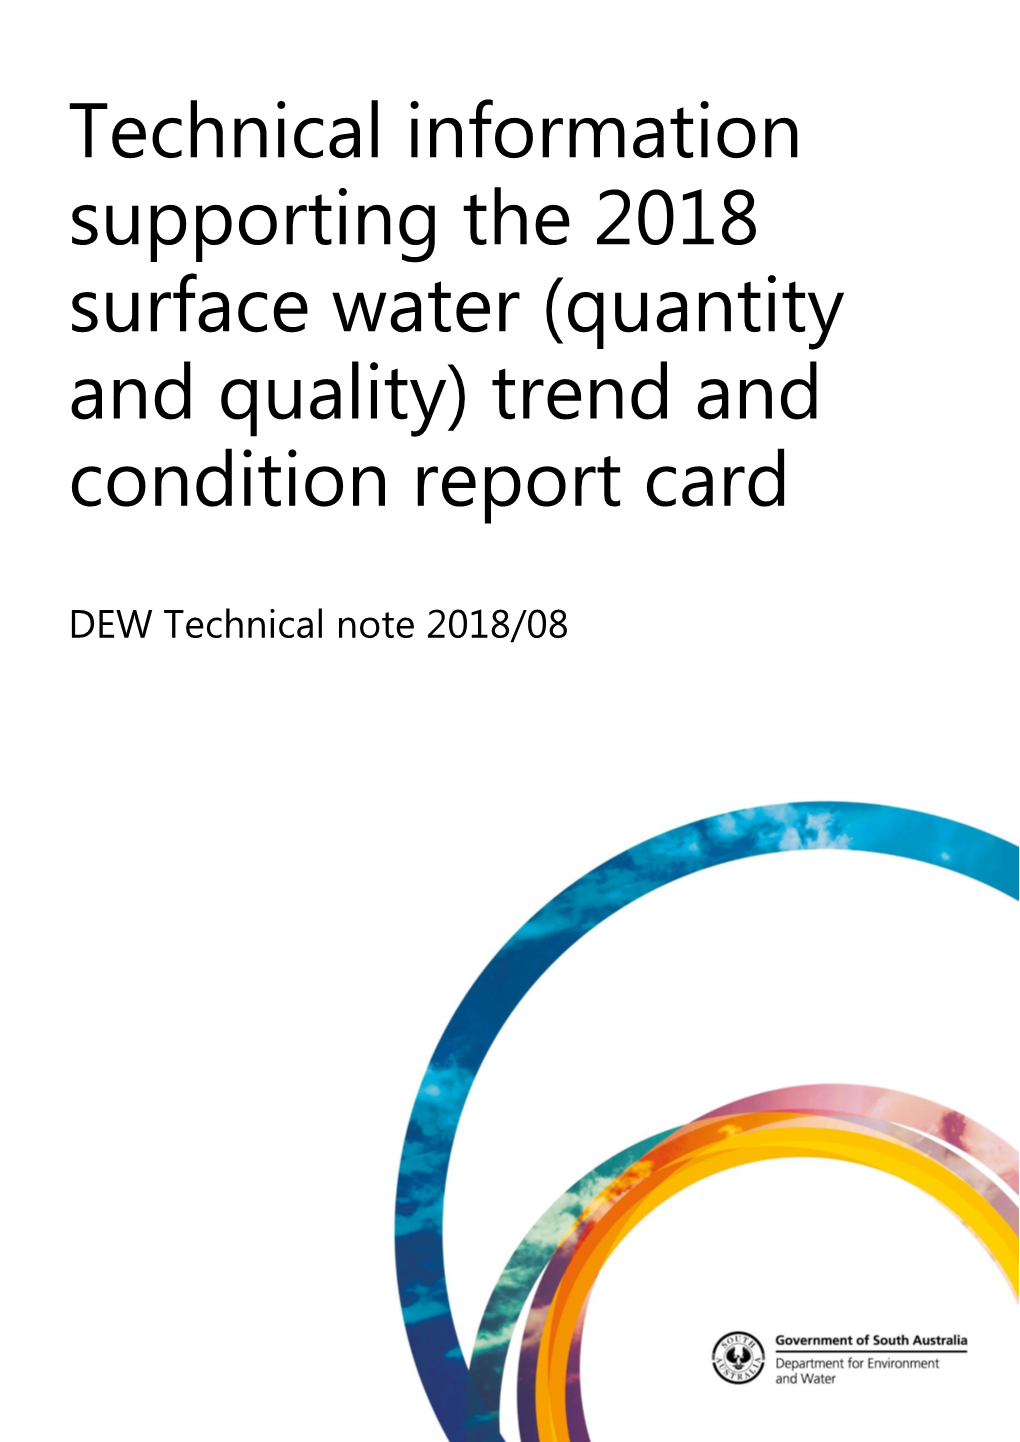 Technical Information Supporting the 2018 Surface Water (Quantity and Quality) Trend and Condition Report Card